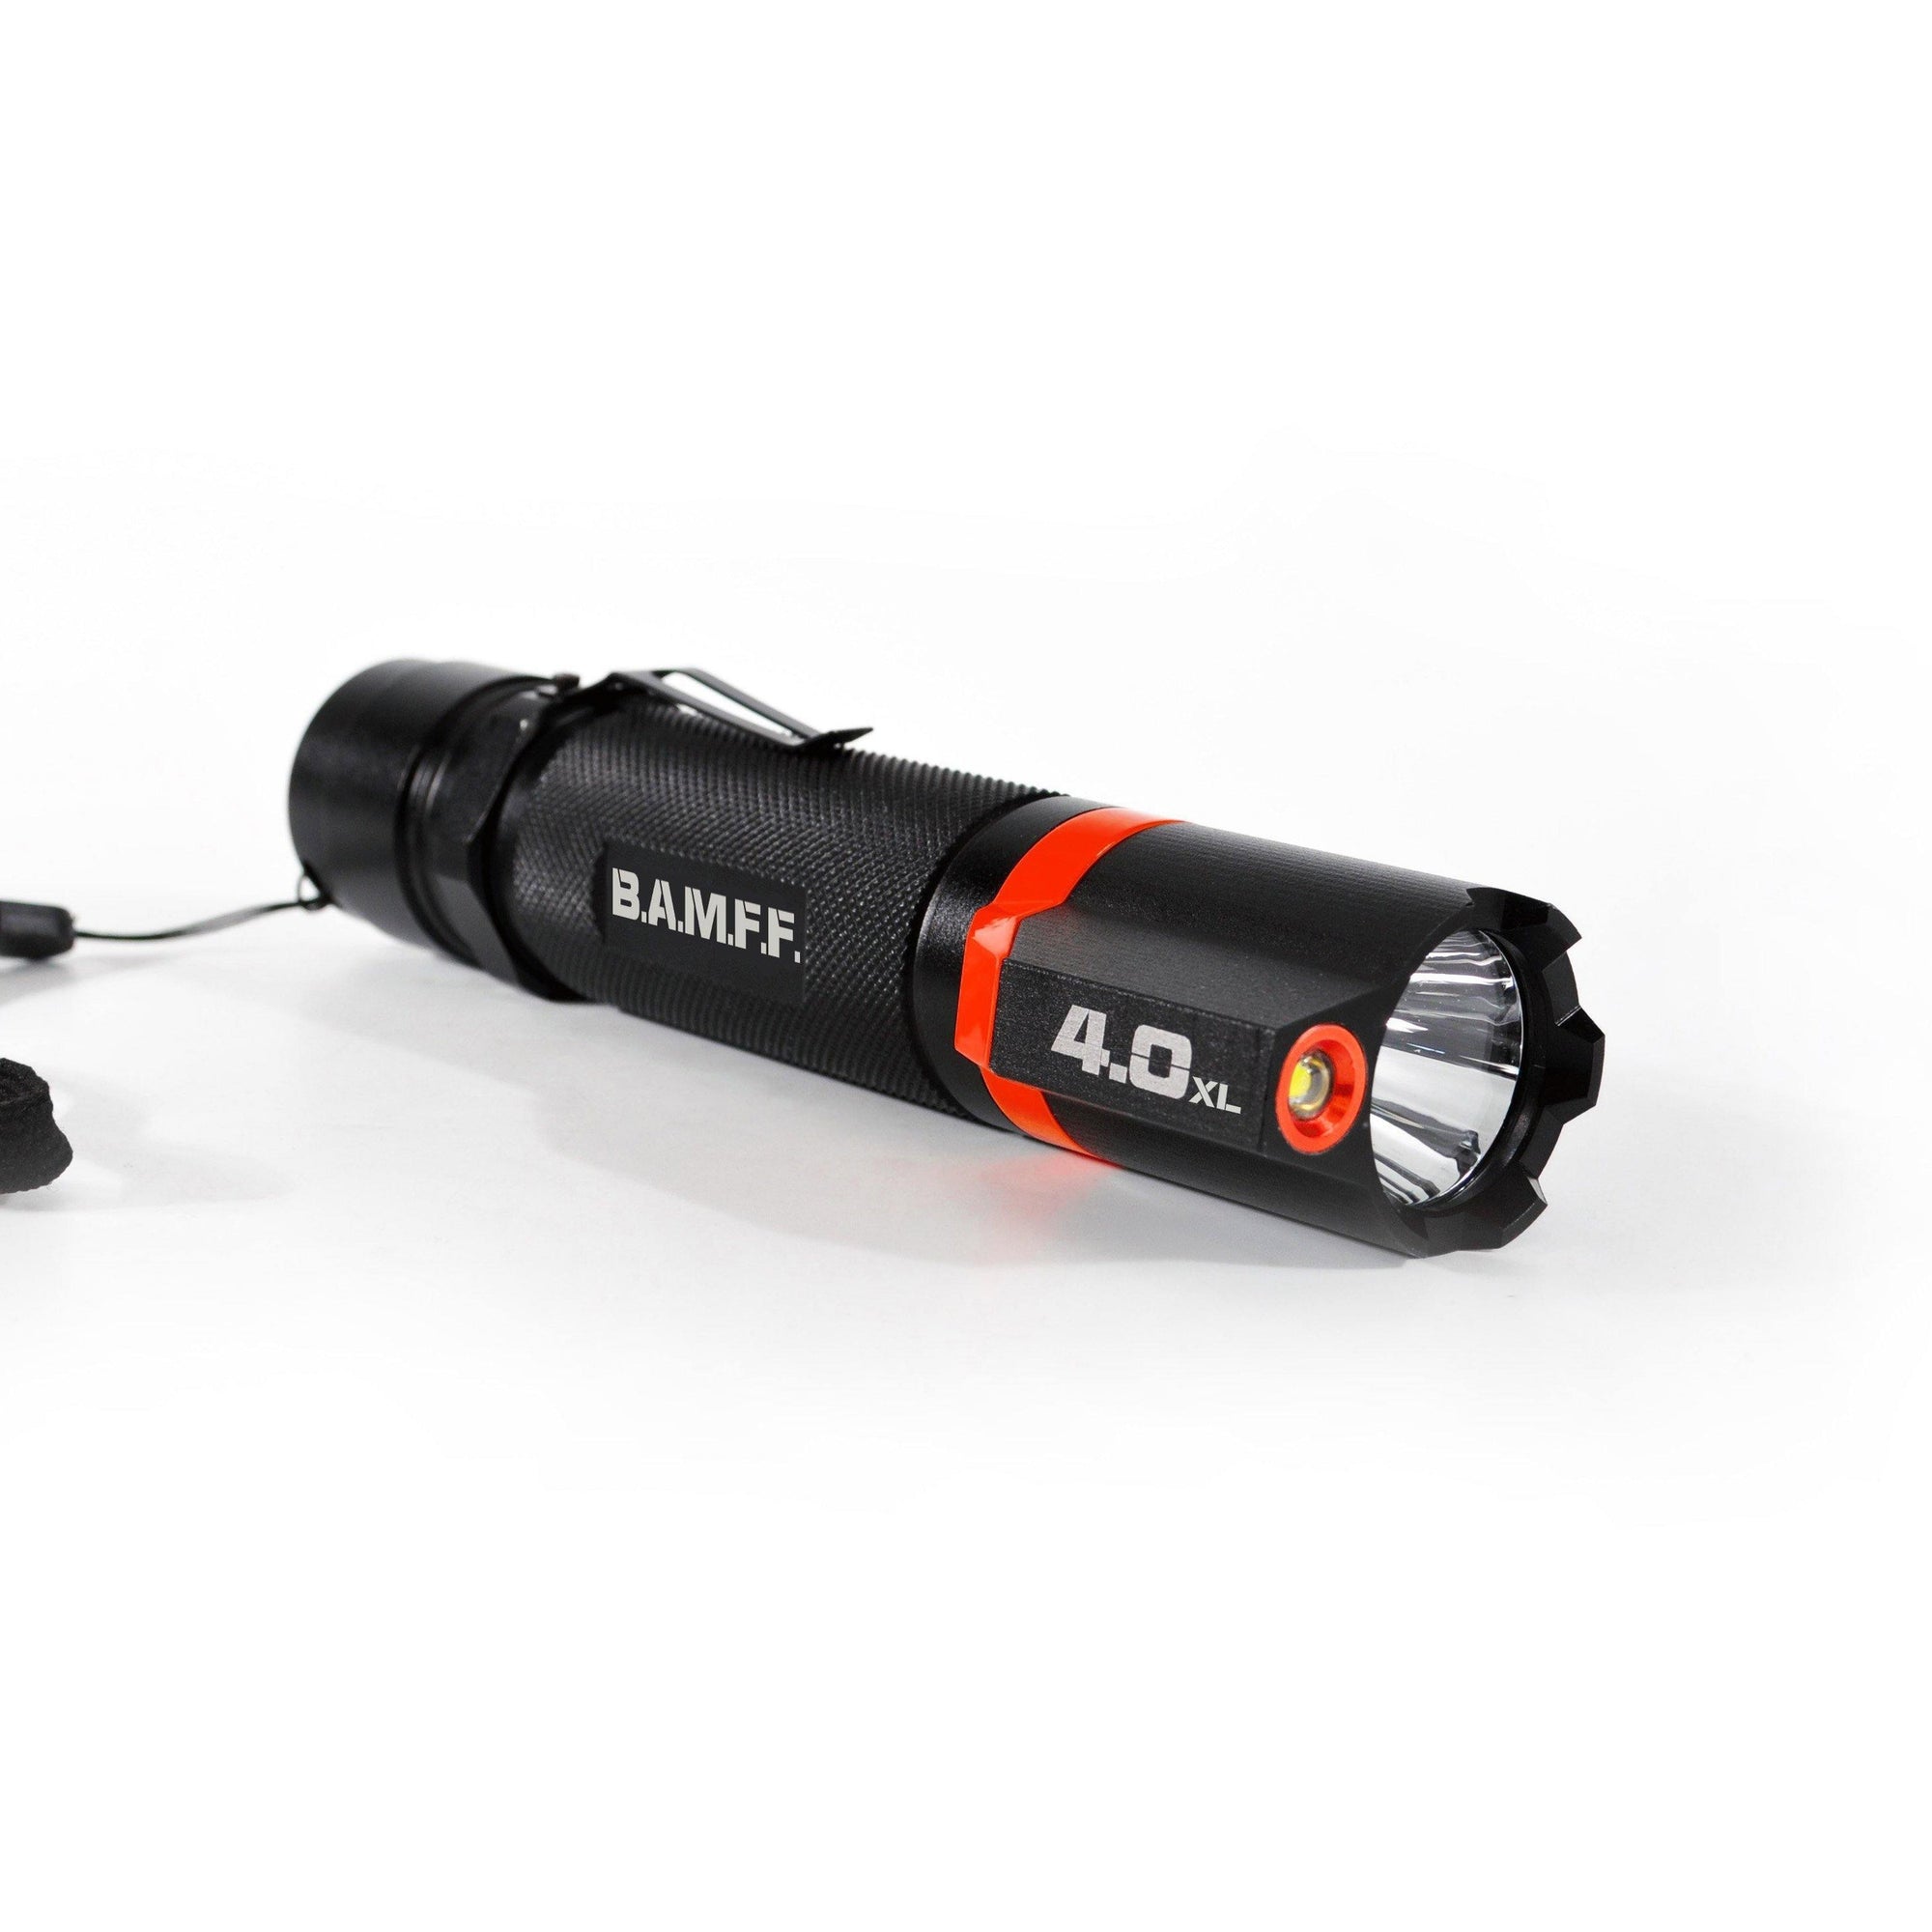 BAMFF 4.0XL dual LED flashlight long distance and area lighting in one | STKR Concepts - striker flashlight